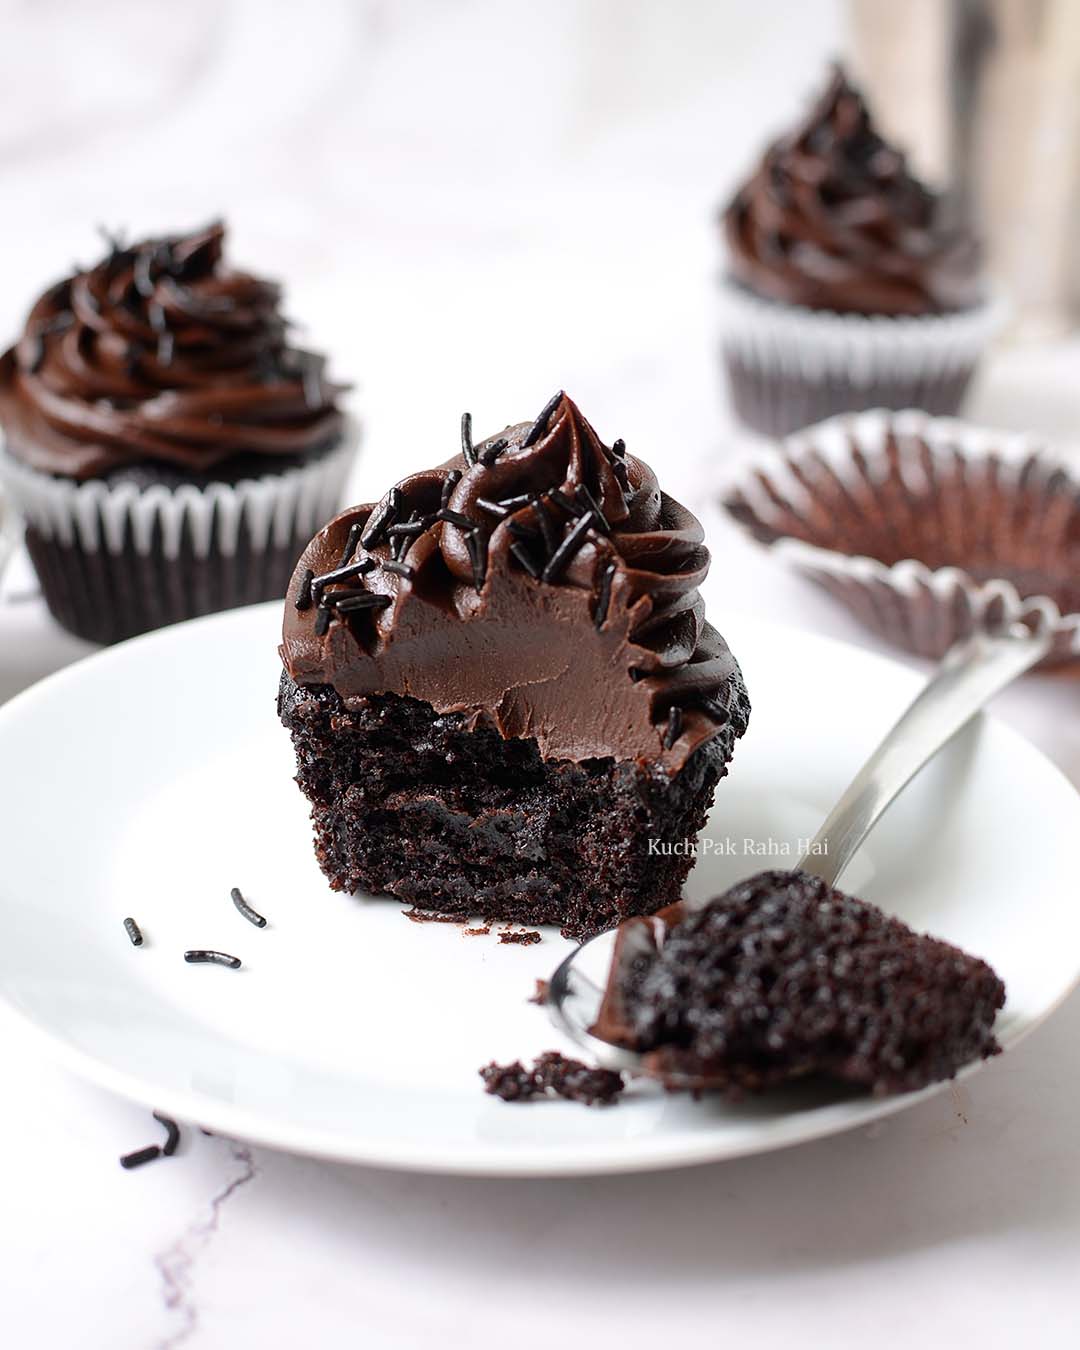 Chocolate Cupcakes with ganache frosting